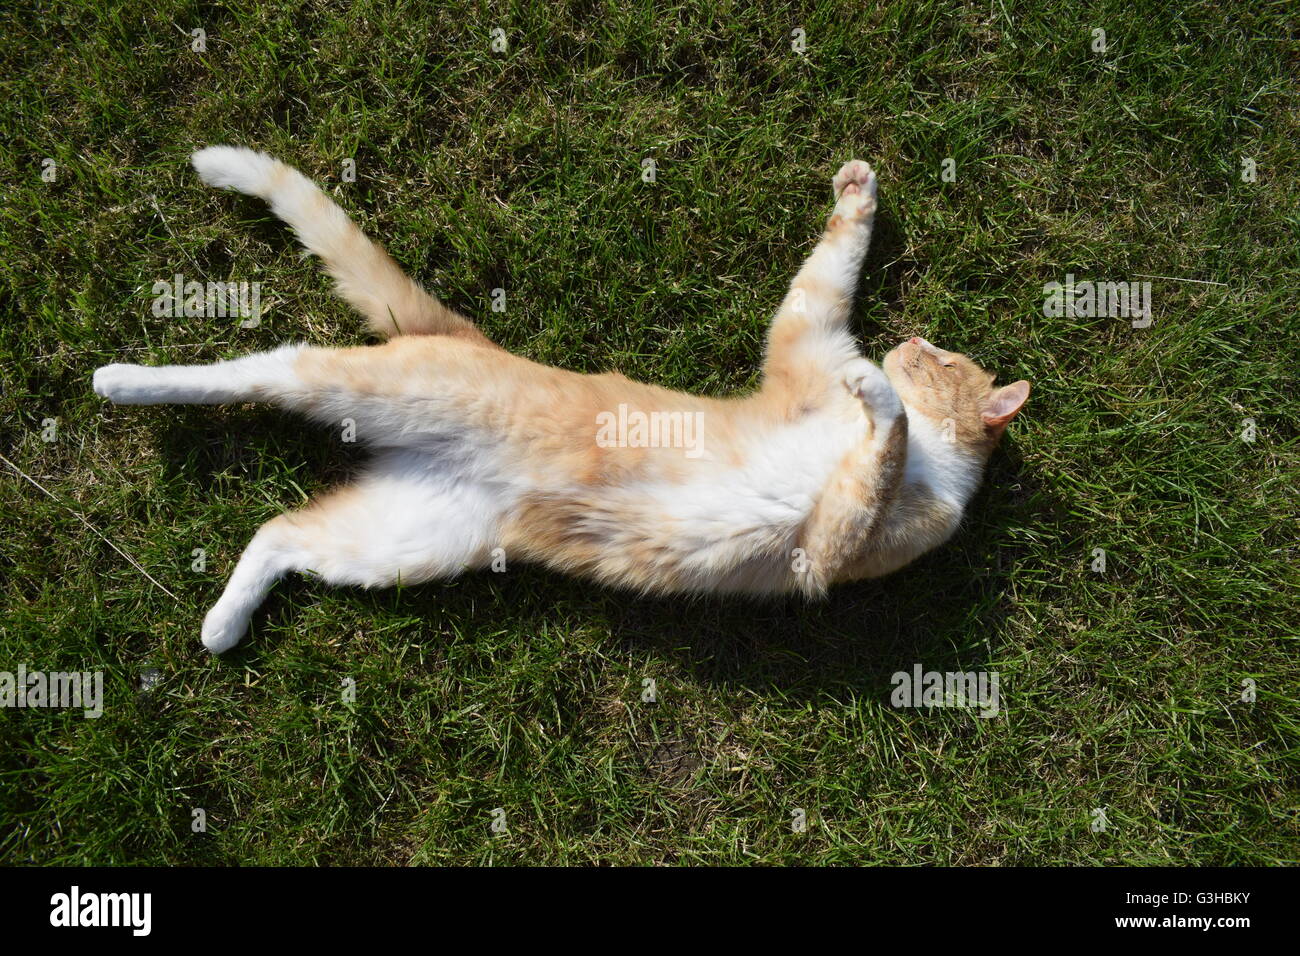 Ginger cat sprawled out on its back on the grass Stock Photo